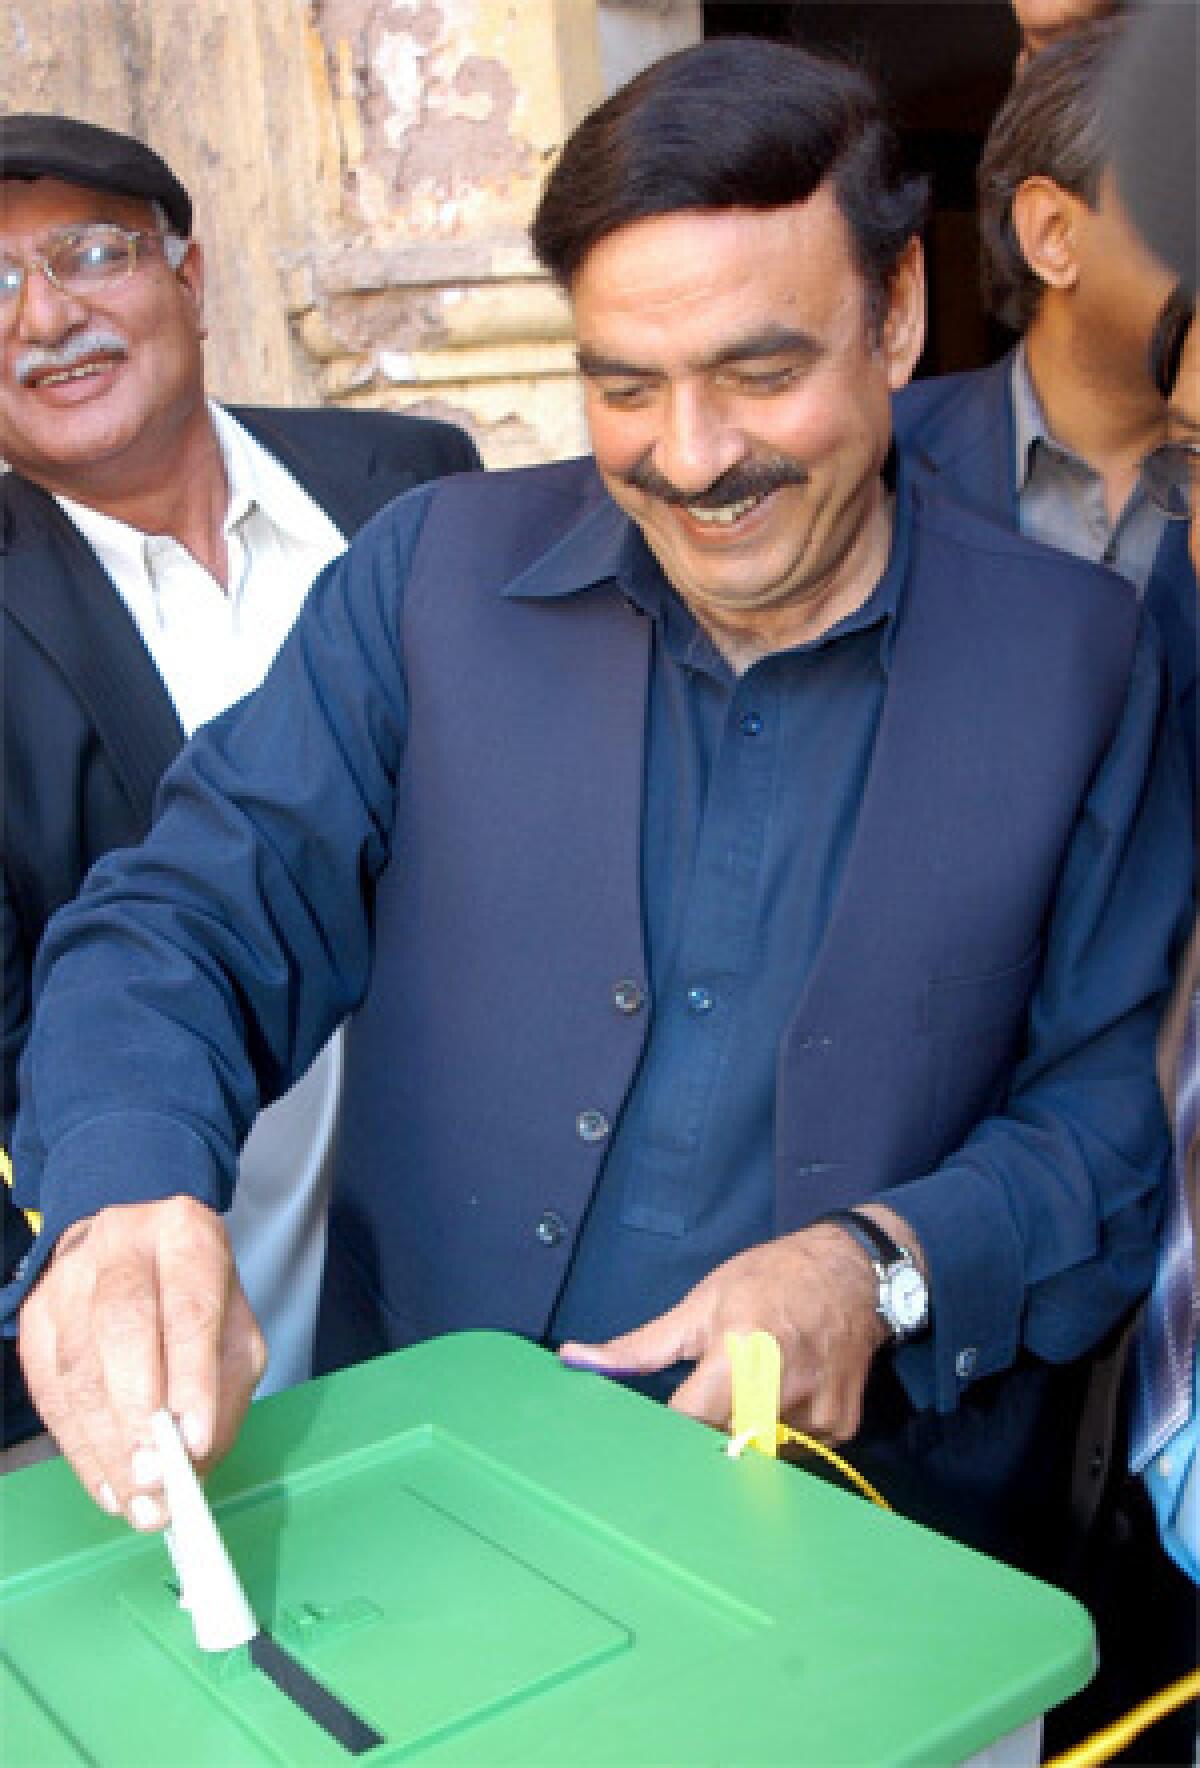 Candidate for National Assembly Sheikh Rashid Ahmed cast his vote today in his district in Rawalpindi. An ally of President Musharraf, he later conceded defeat along with others in his party.